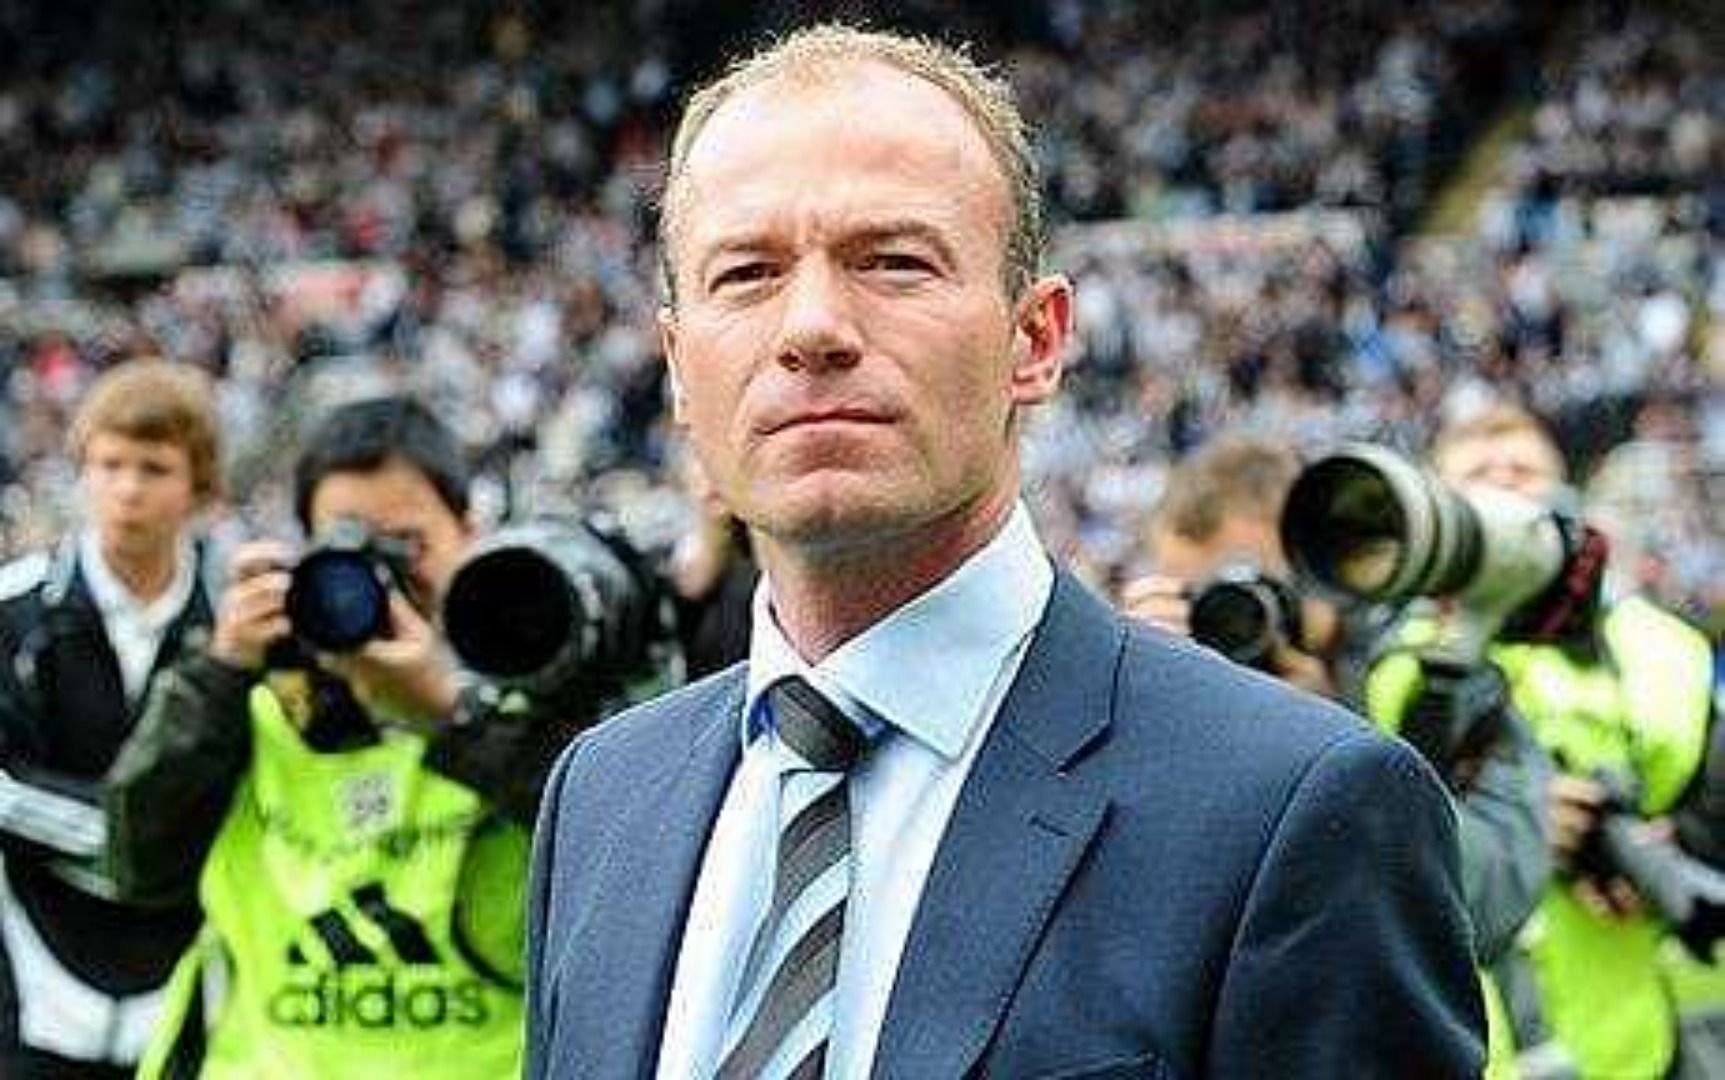 Alan Shearer was appointed manager of former club Newcastle United in April 2009.